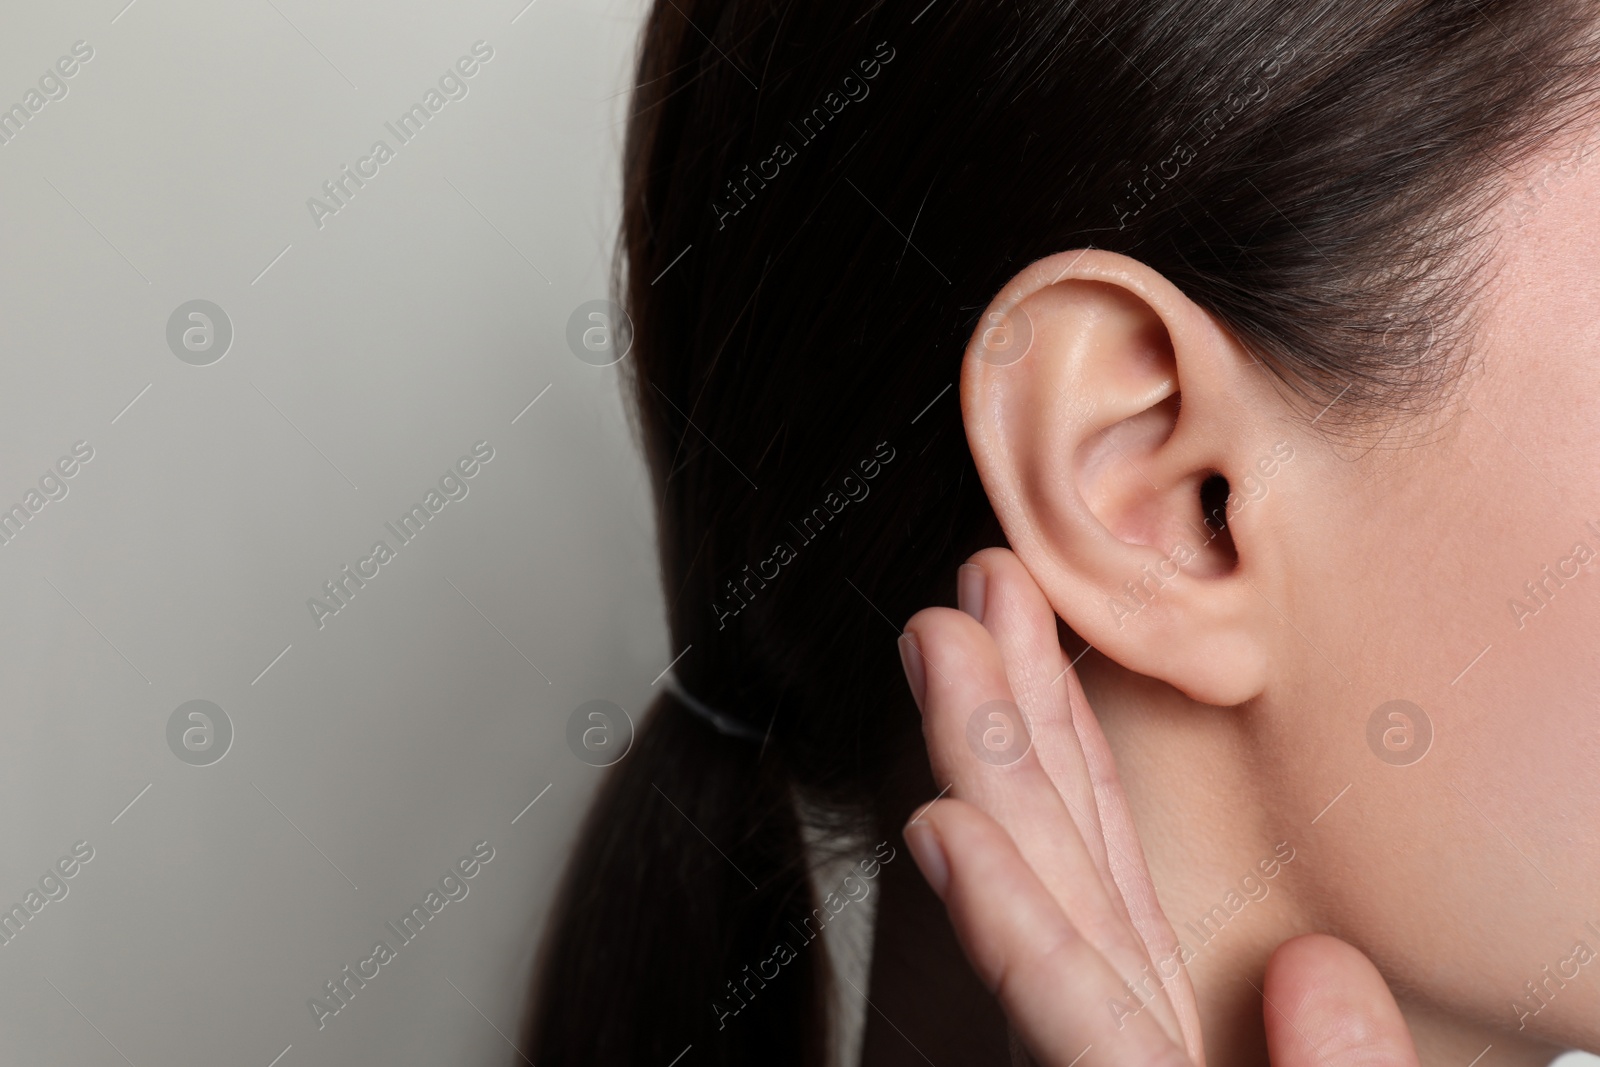 Photo of Woman showing hand to ear gesture on light background, closeup. Space for text